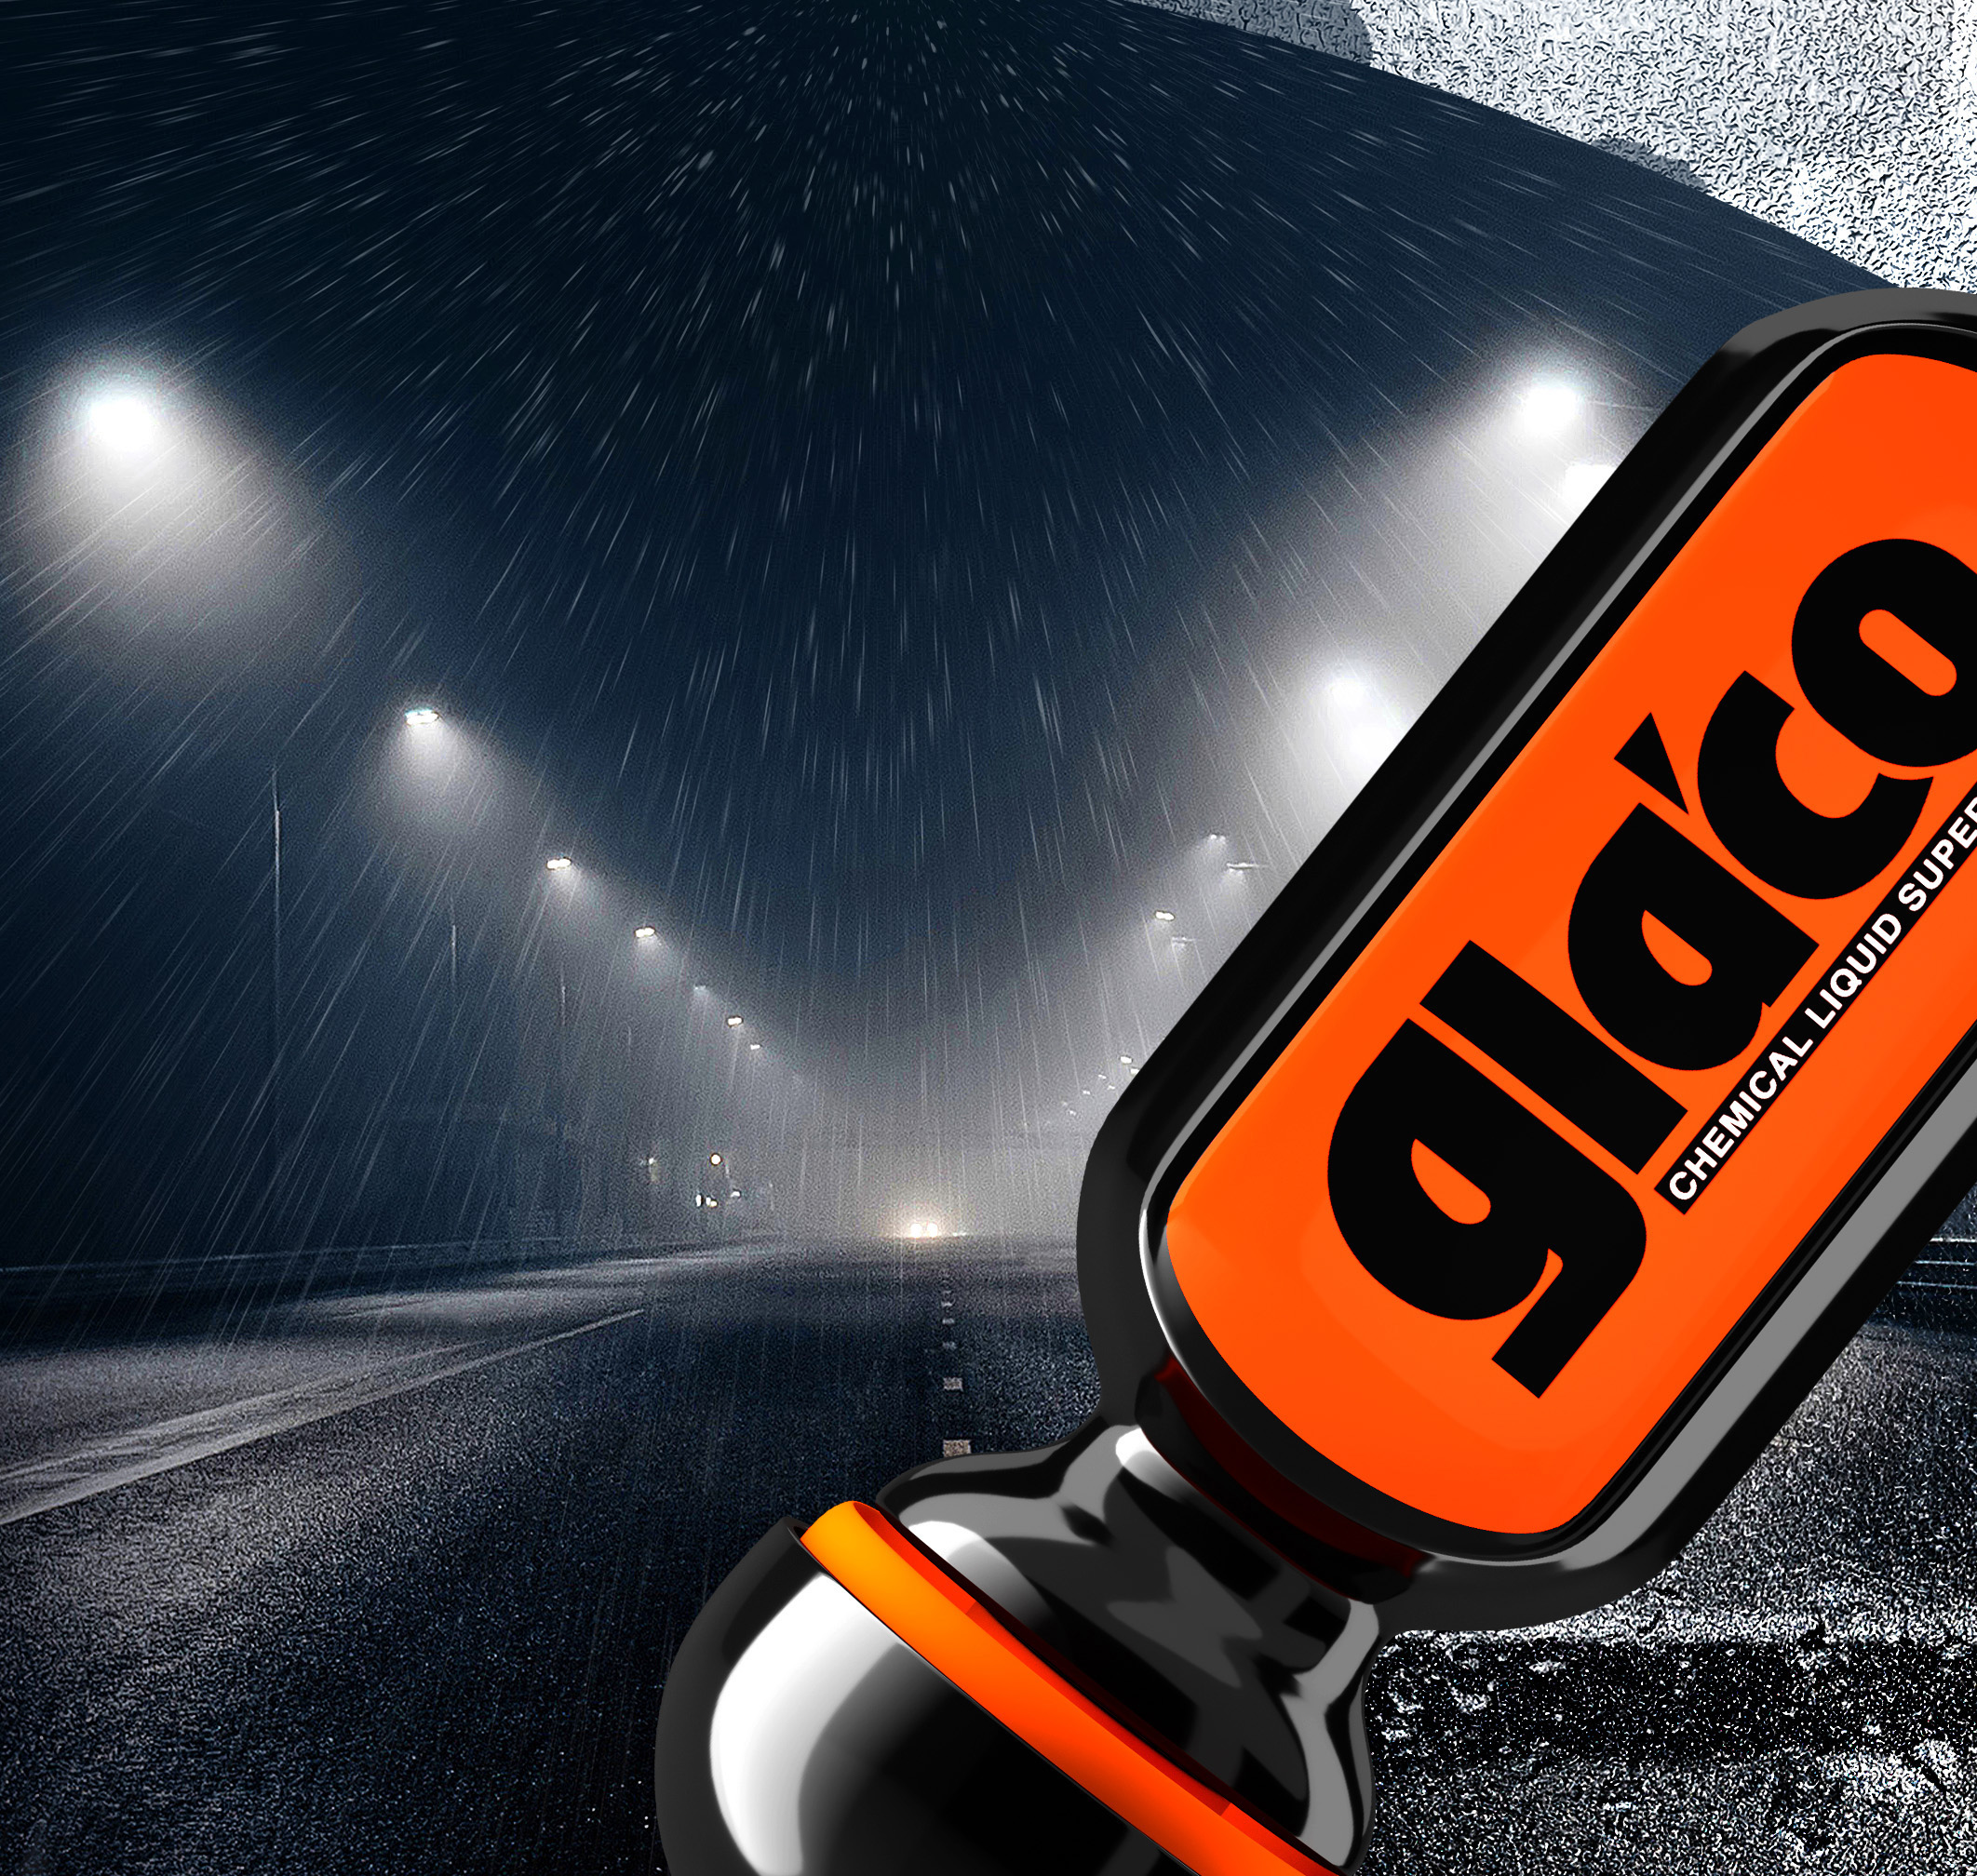 Soft99 Glaco Glass Compound and Glaco review: Liquid windscreen wipers